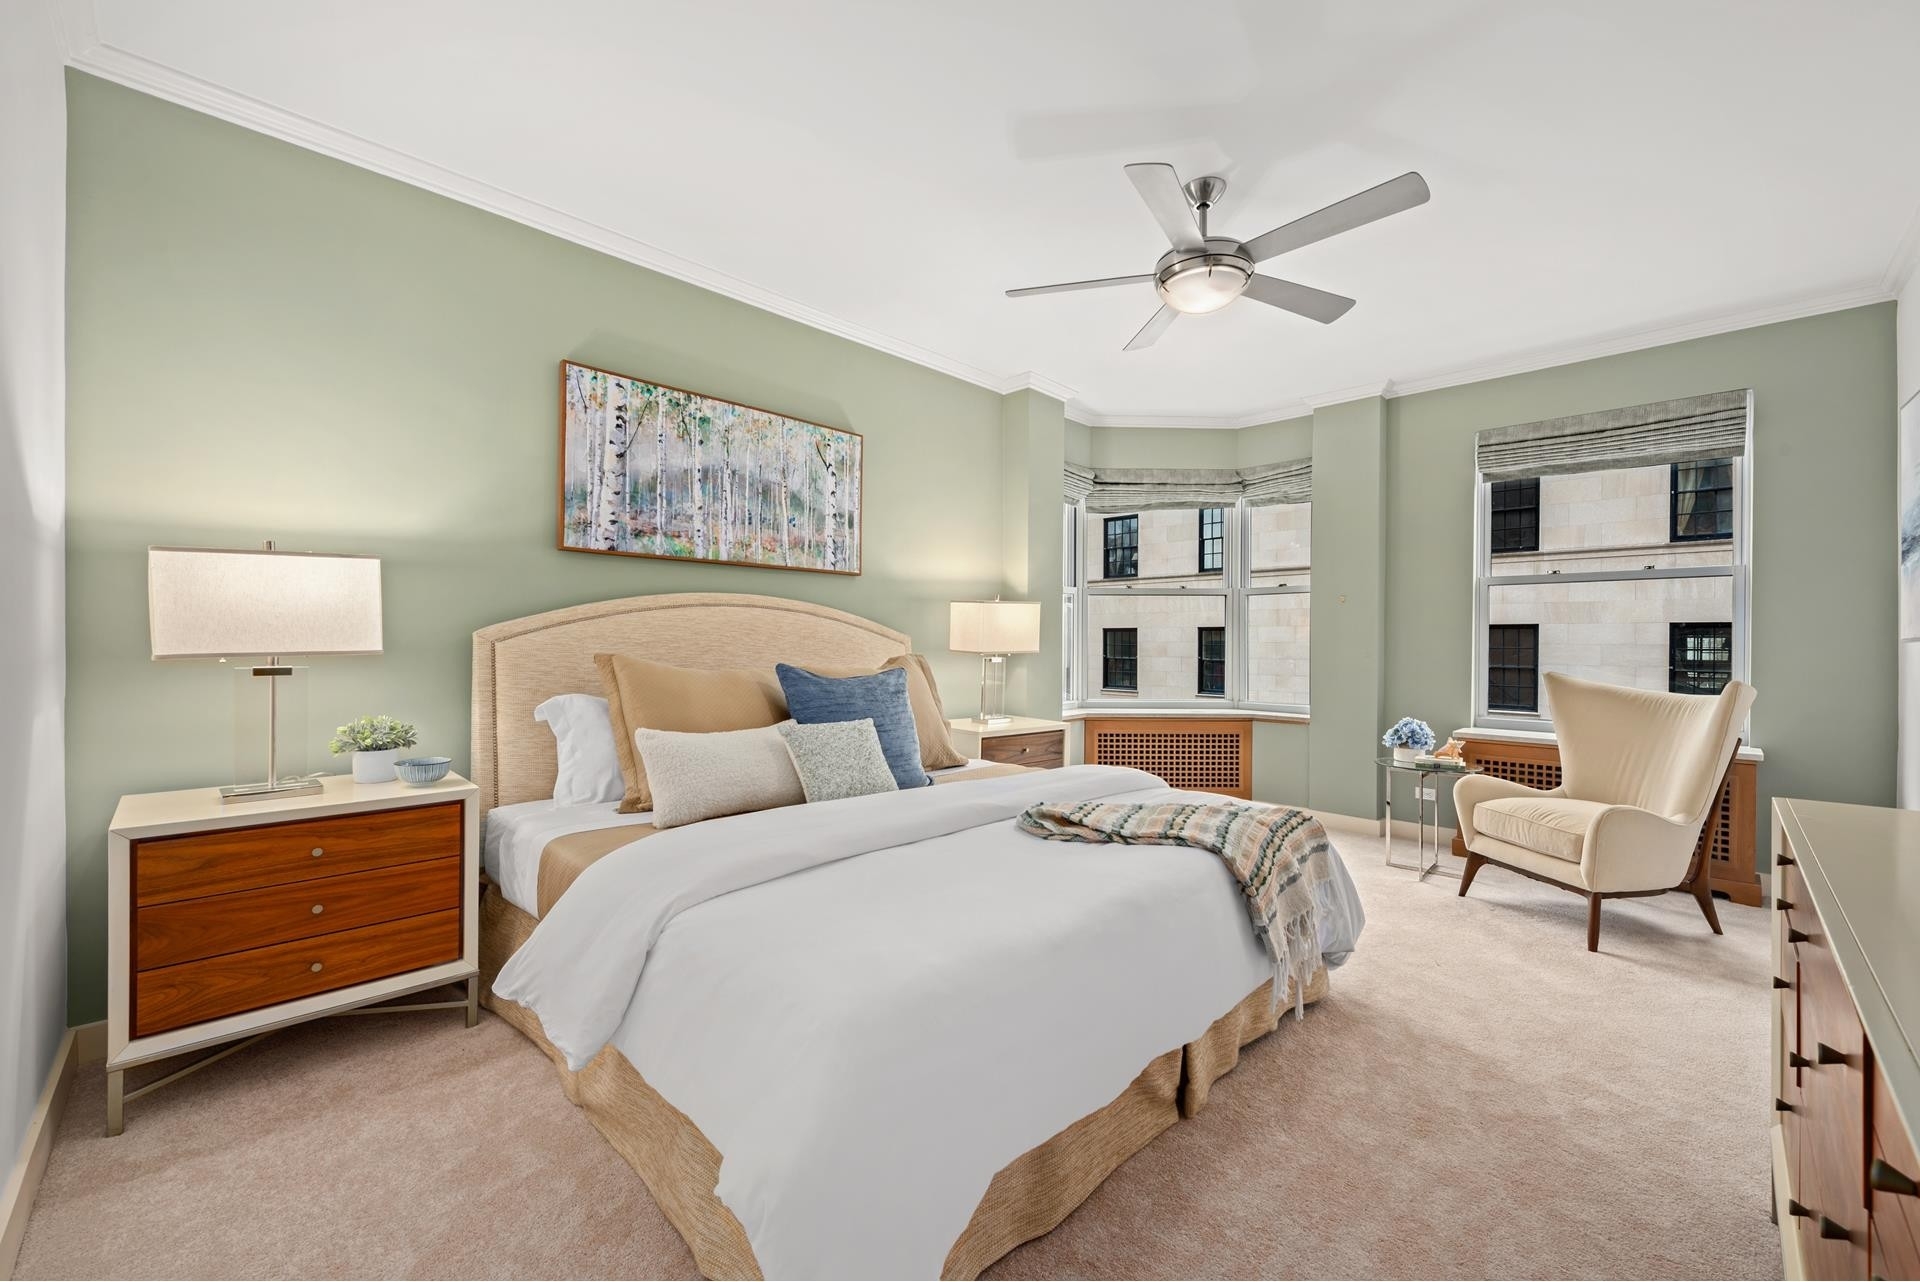 7. Co-op Properties for Sale at 1 E 66TH ST, 11D Lenox Hill, New York, NY 10065